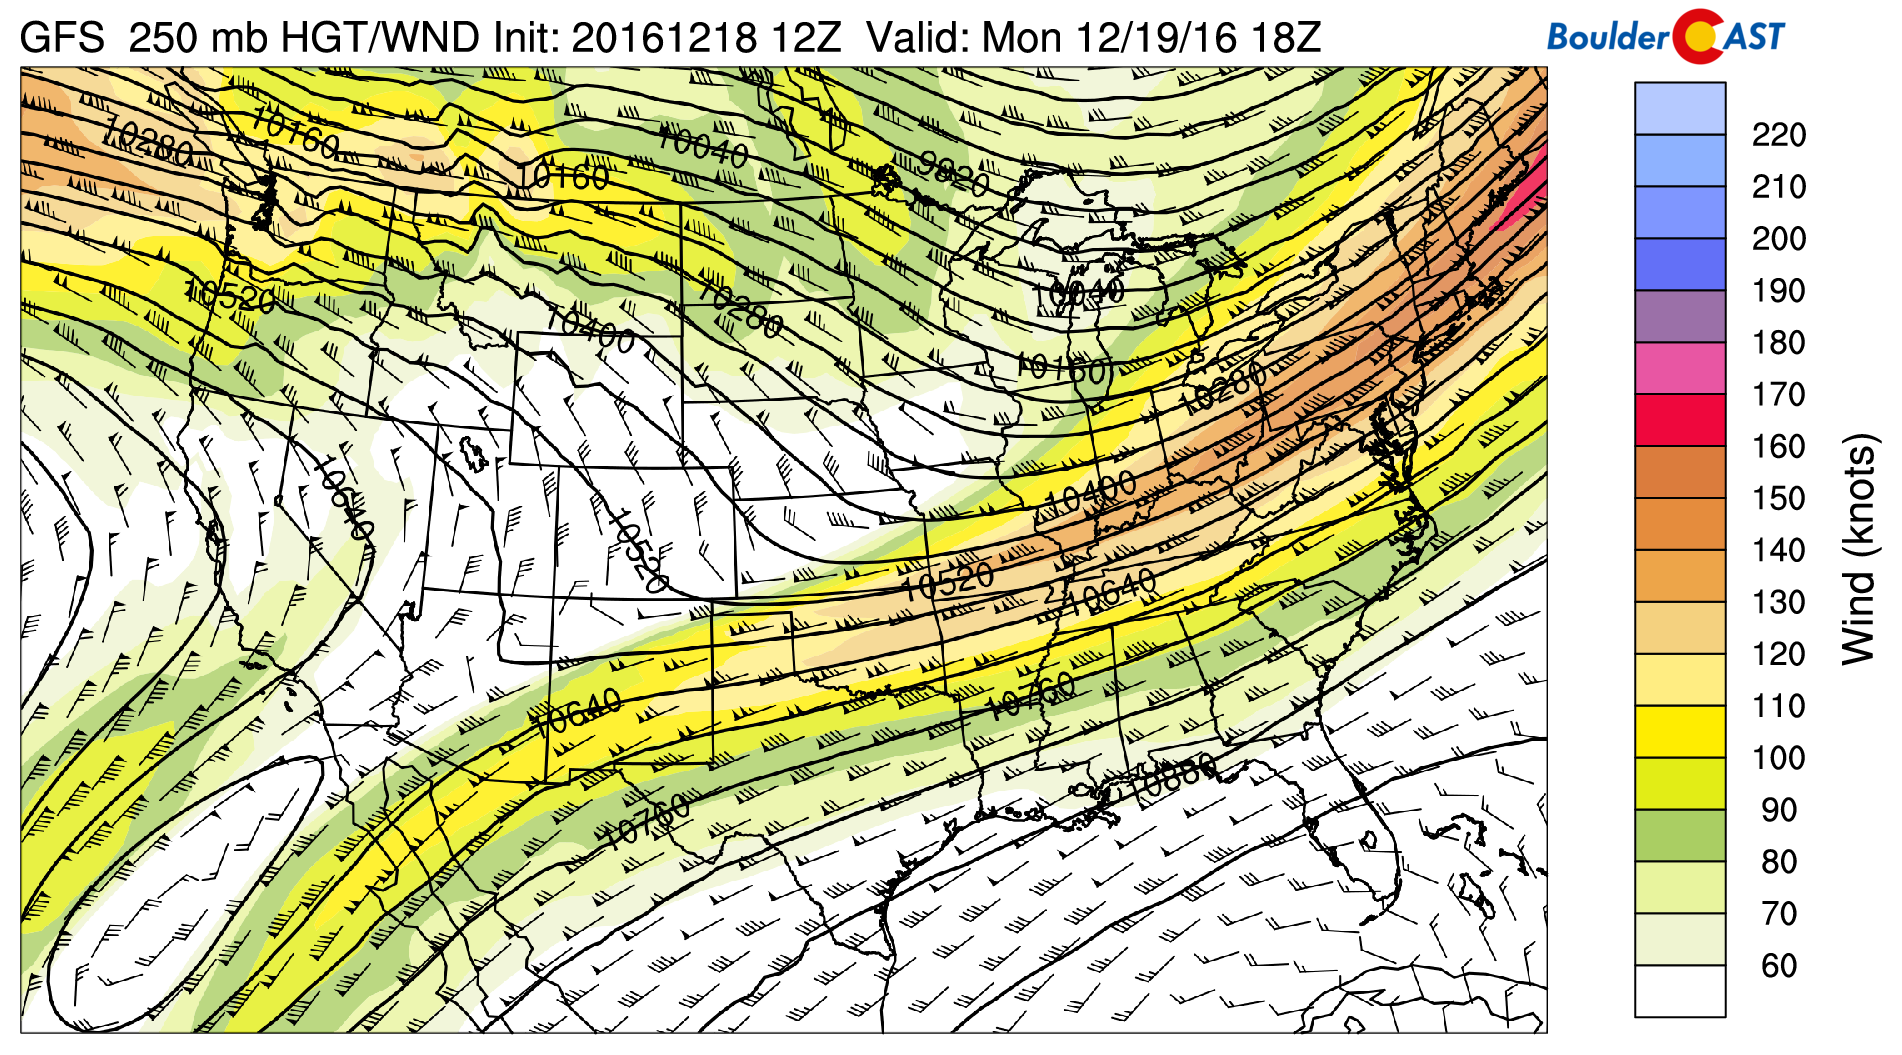 GFS 250 mb upper-level wind and height pattern today